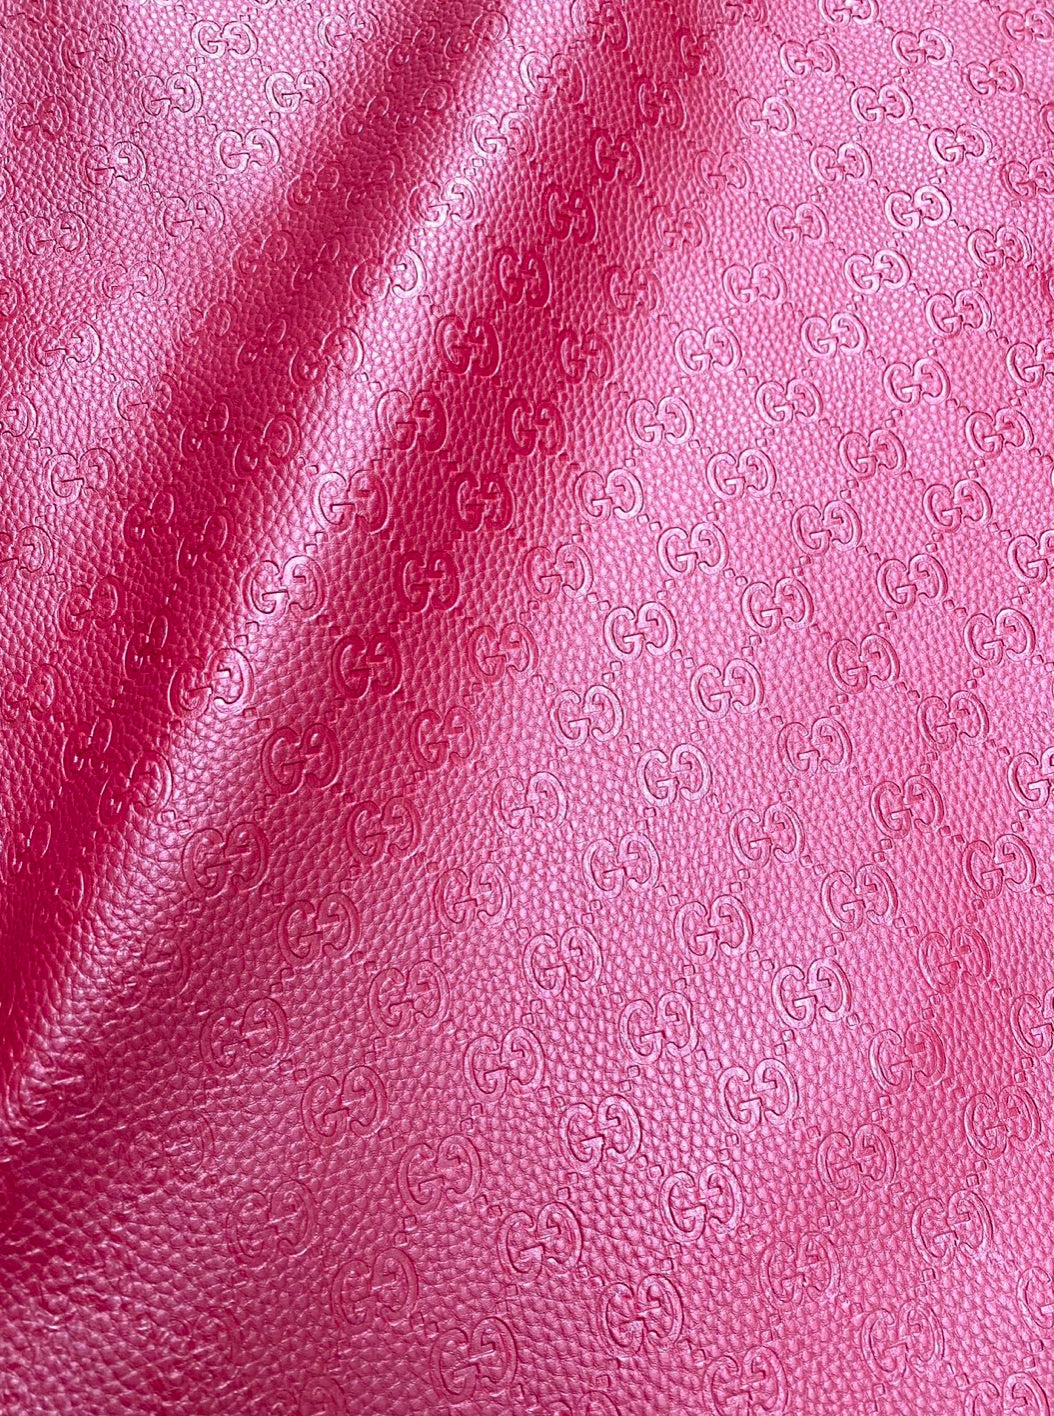 Pure Red Gucci Embossed Leather for Custom Car-interior Furniture